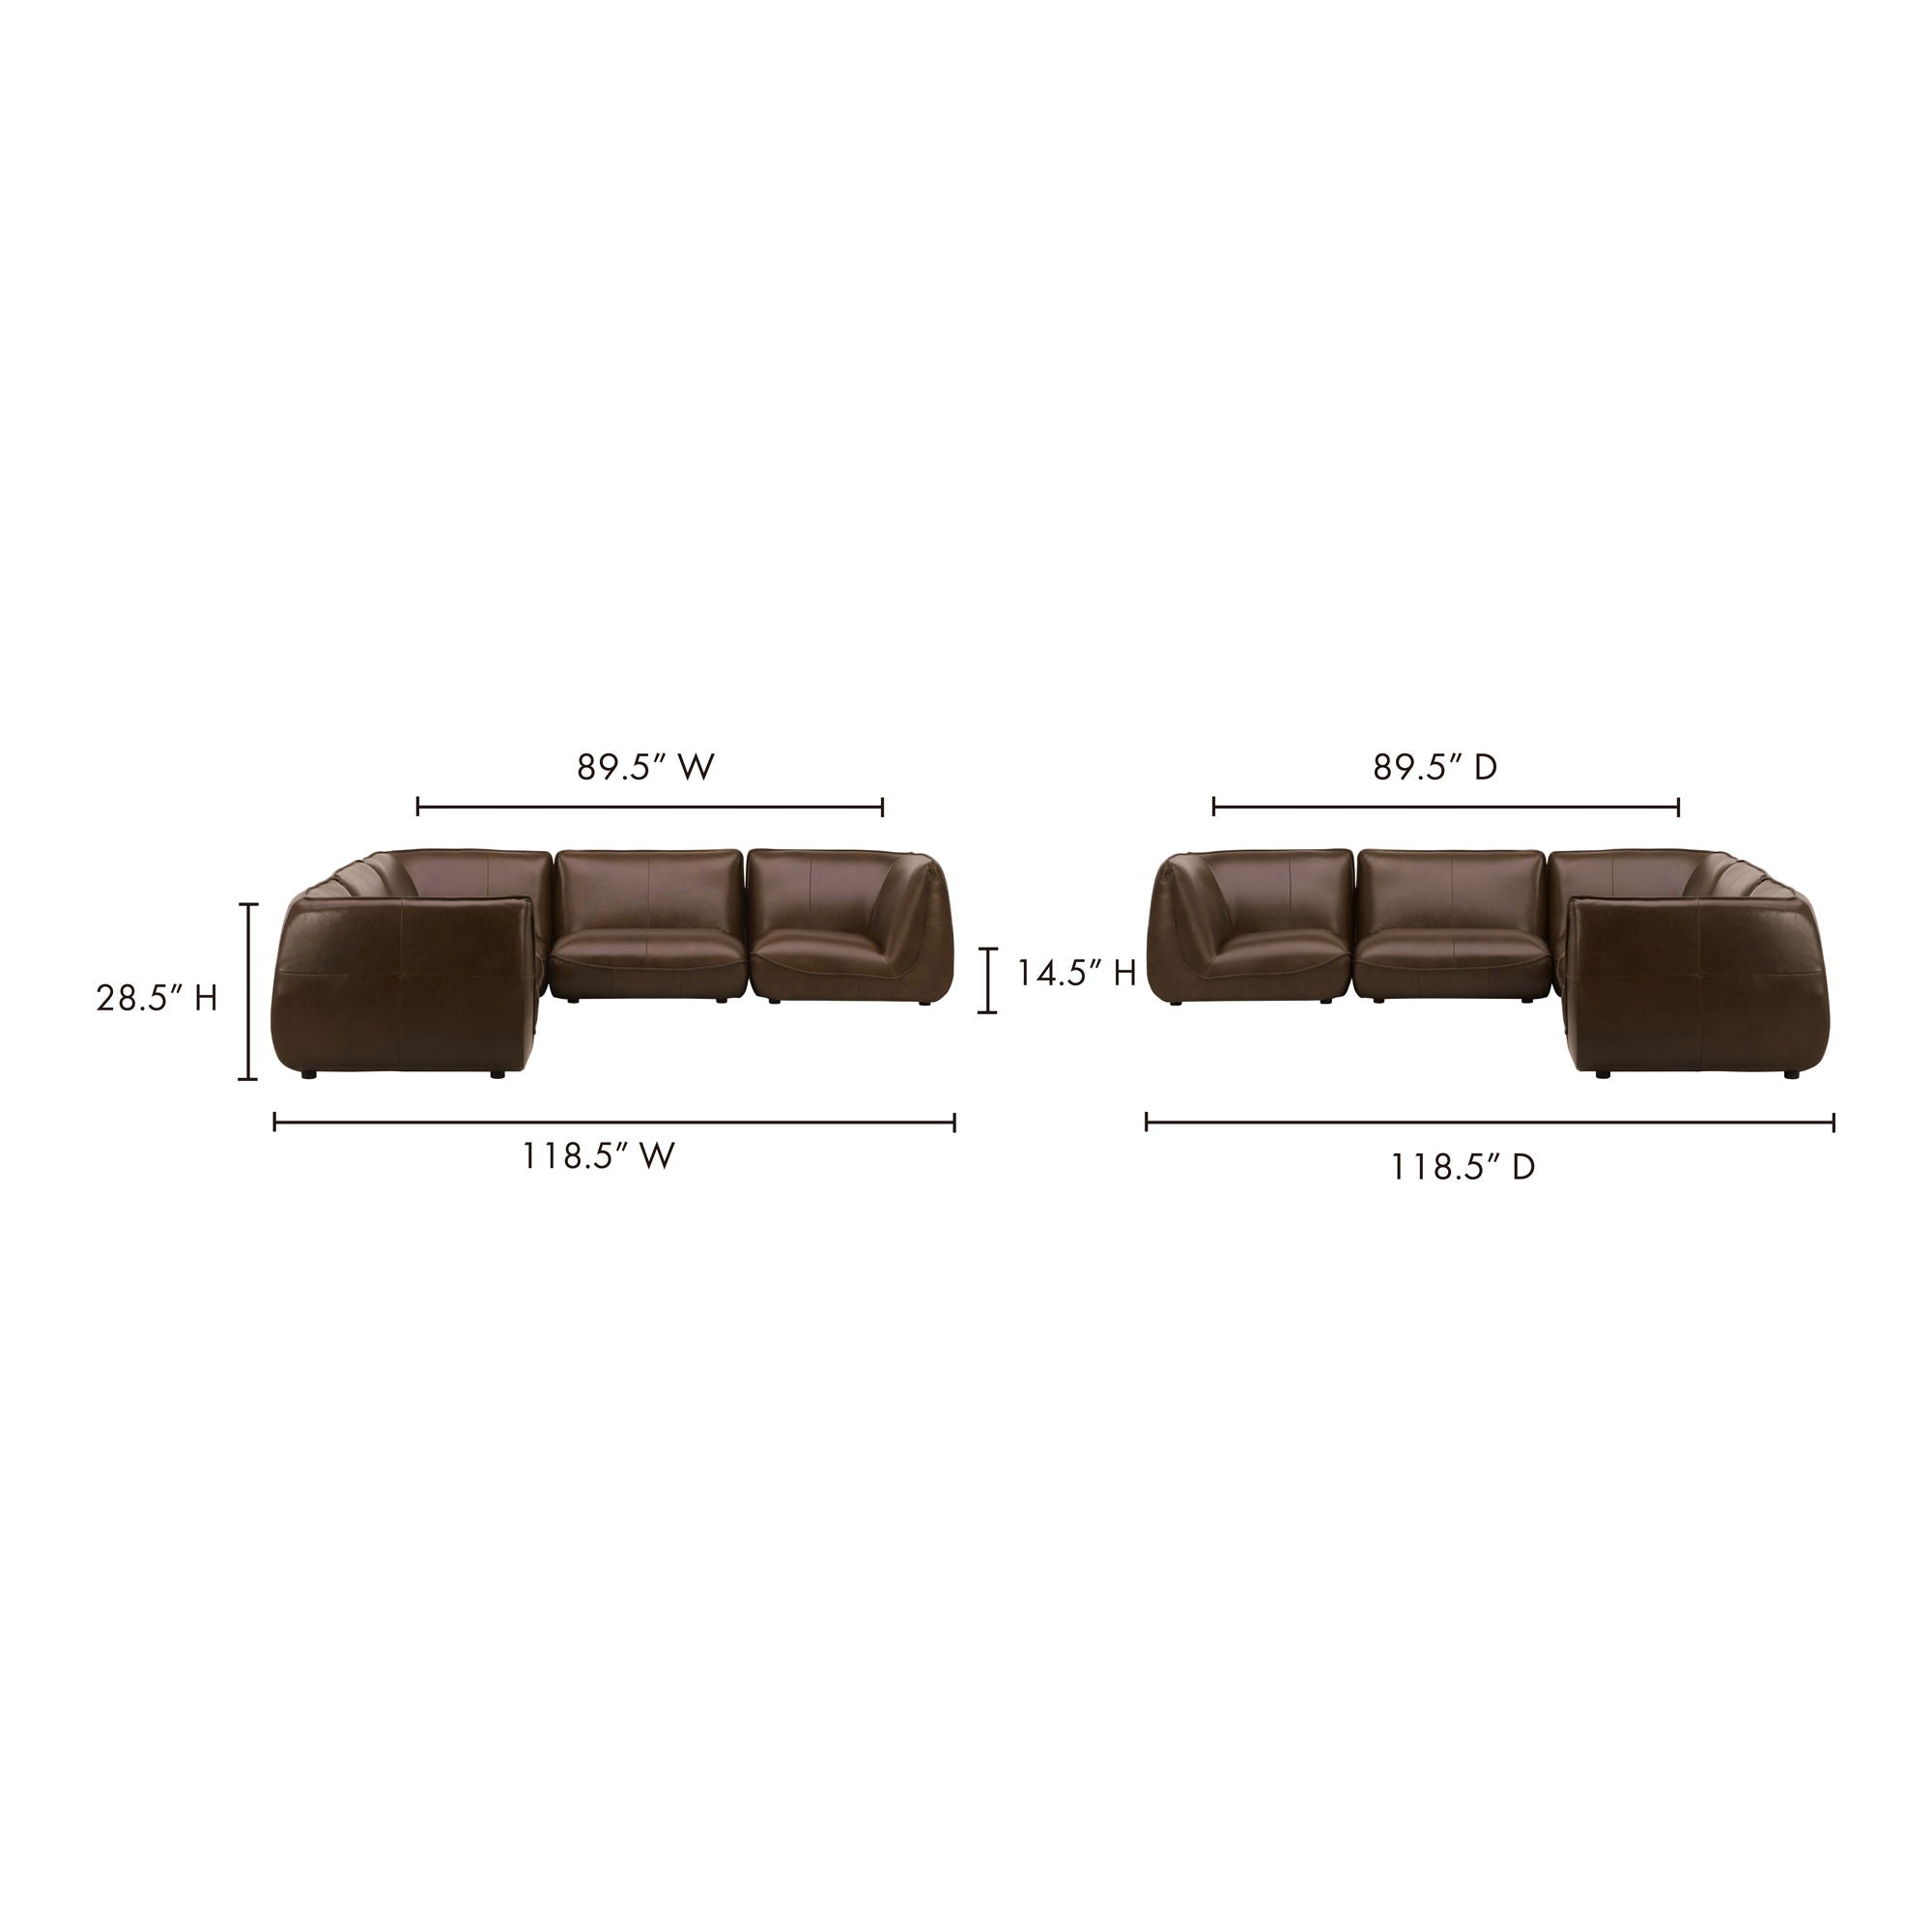 Zeppelin - Classic L Modular Leather Sectional